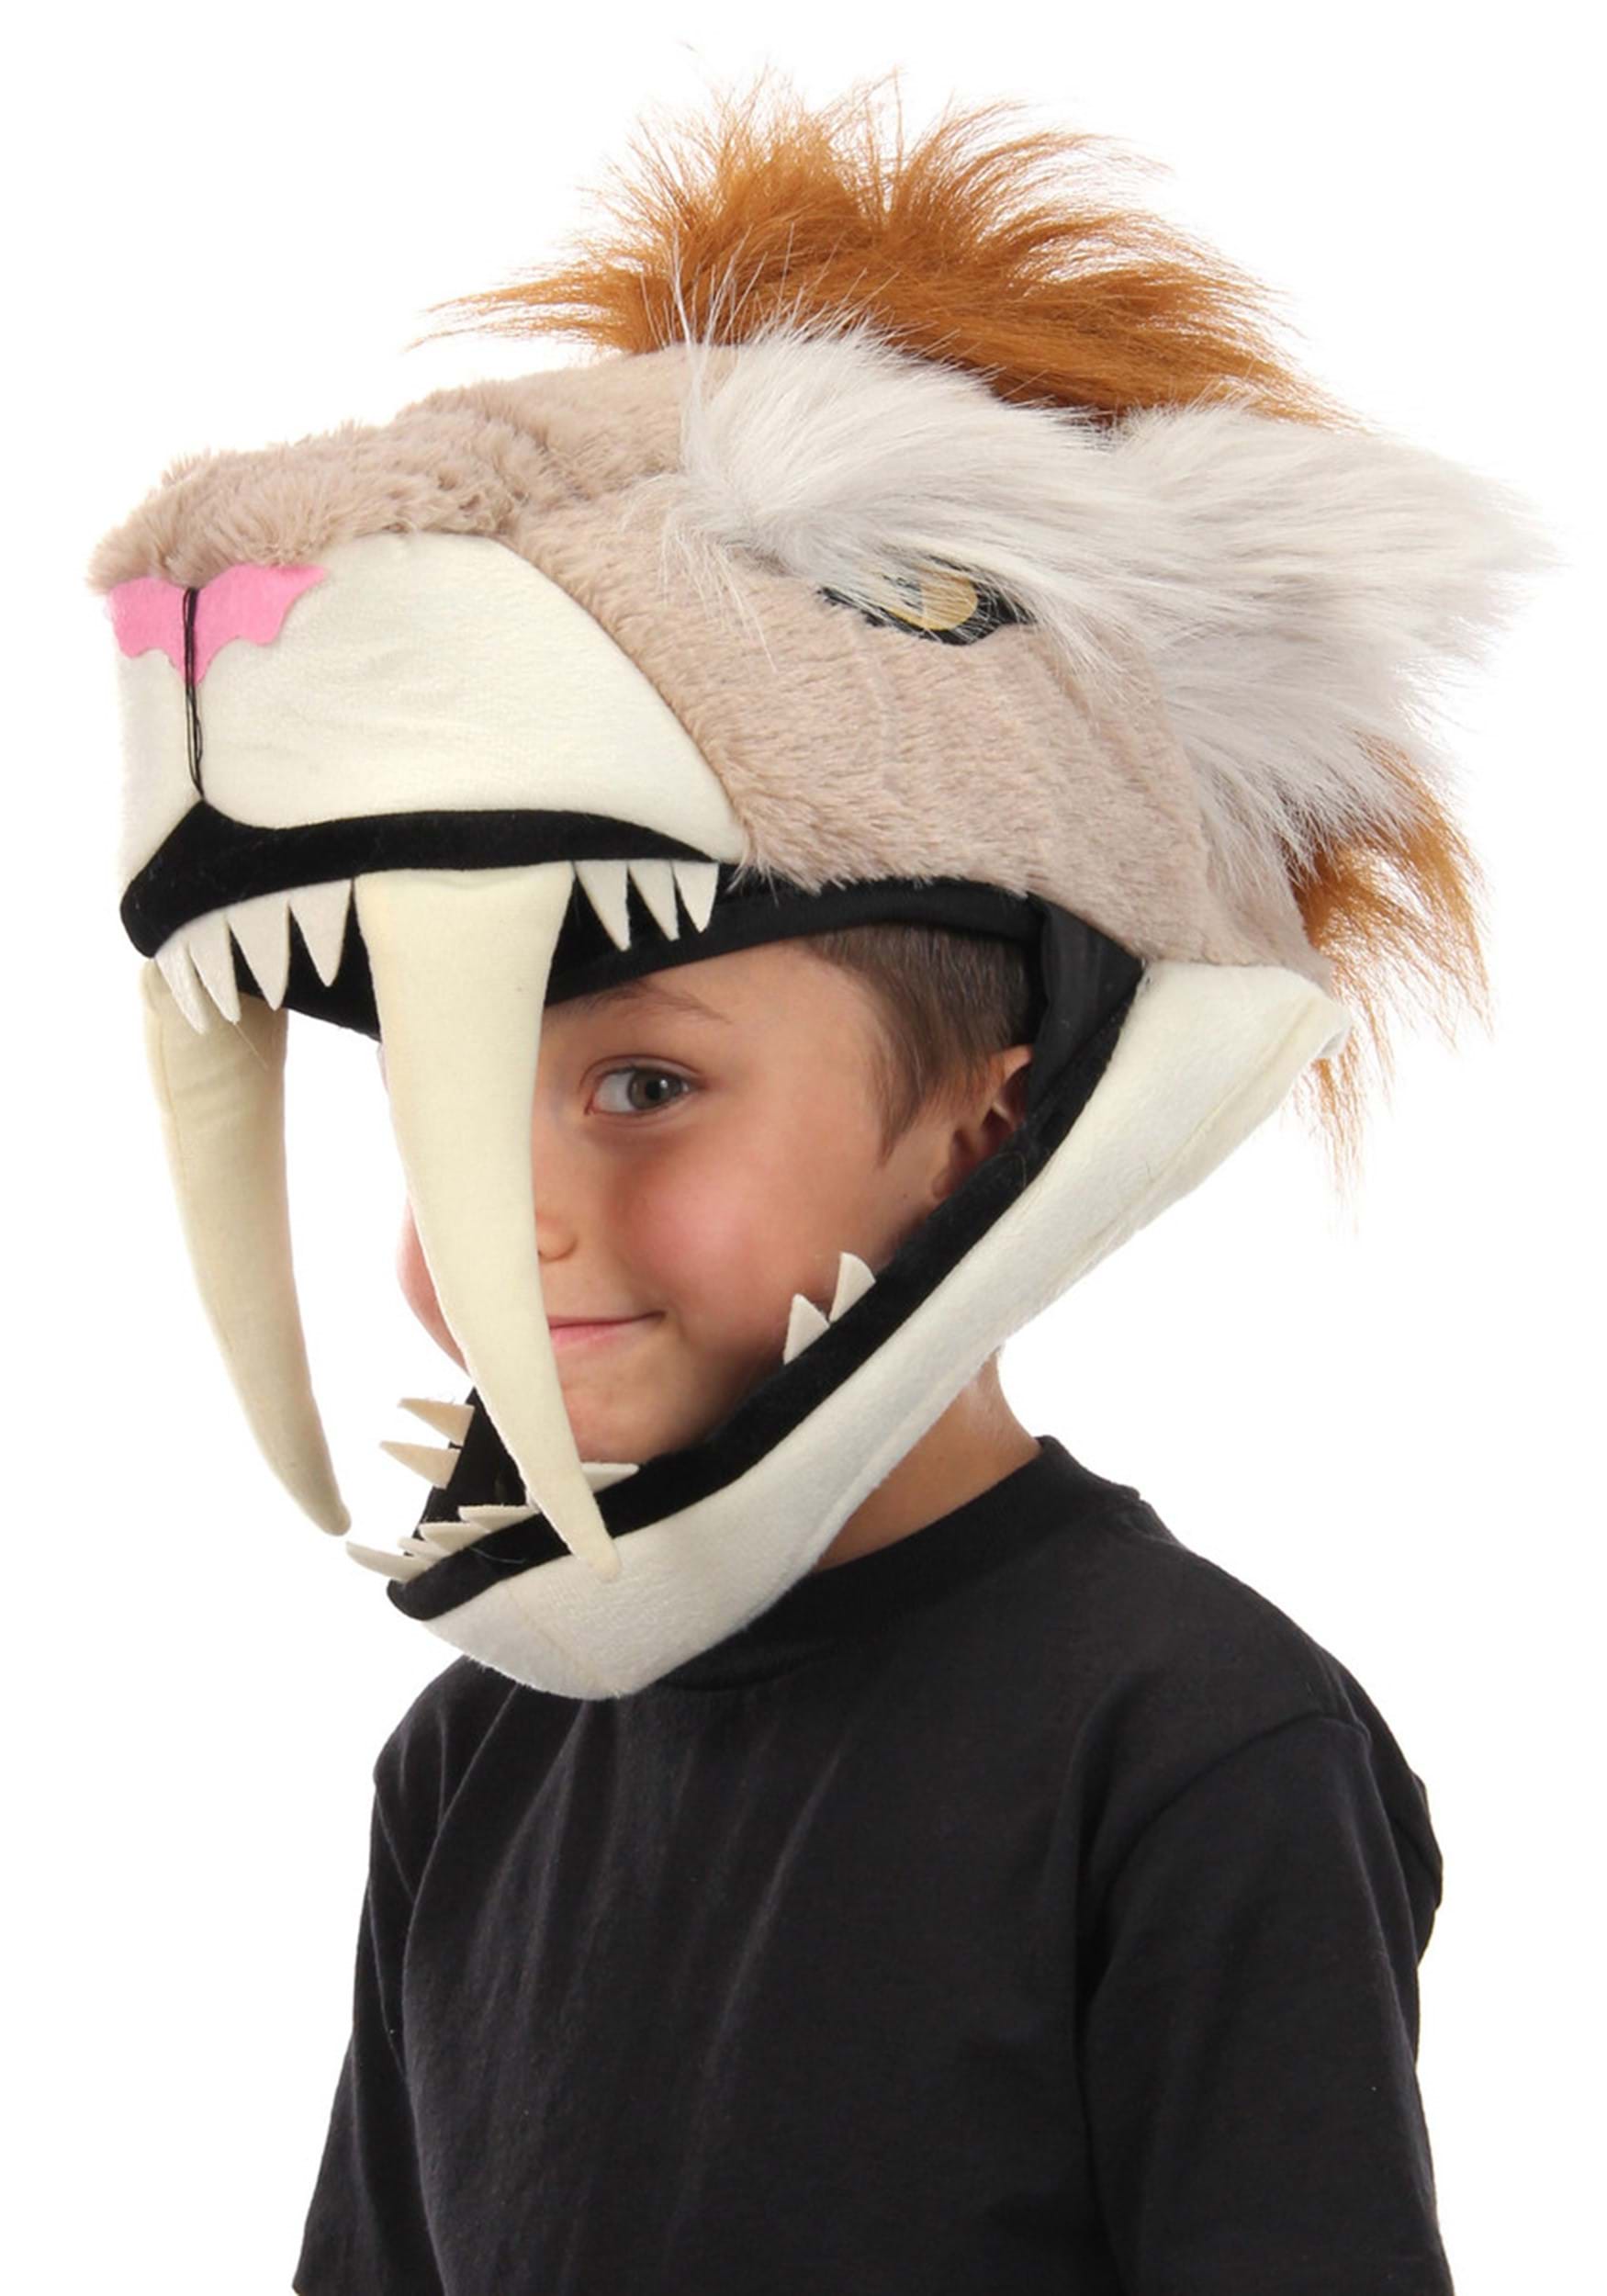 Jawesome Fancy Dress Costume Hat Sabertooth